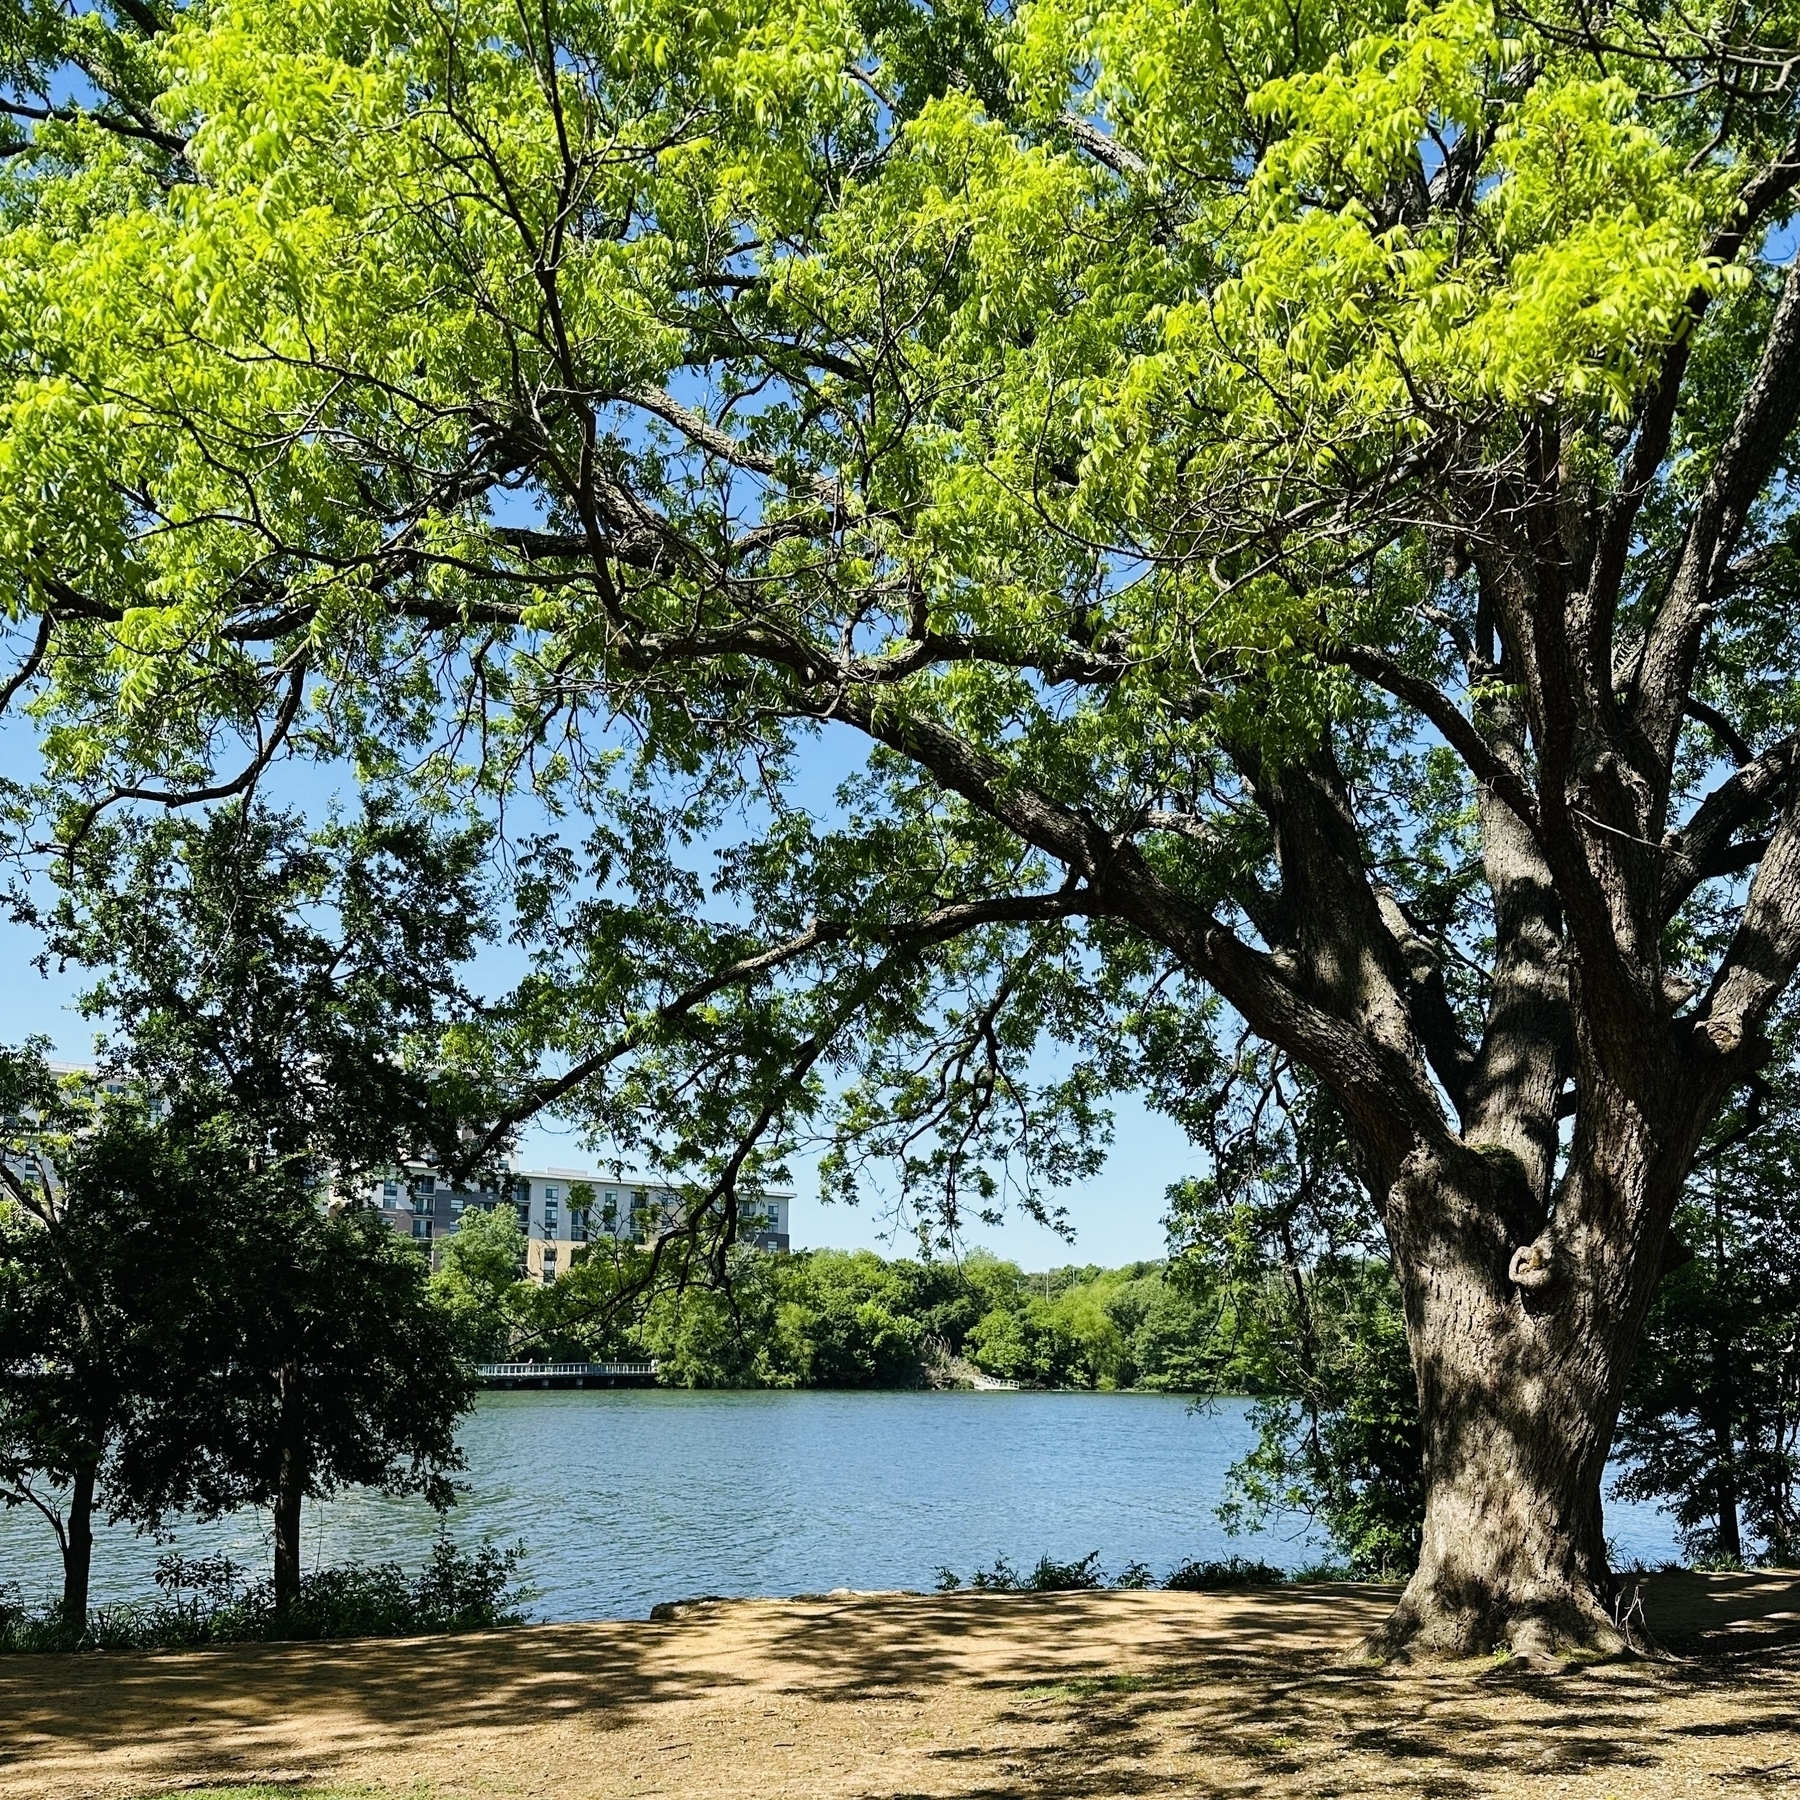 Photo of lake with large tree in front of it, apartments in the background. Just east of I-35.